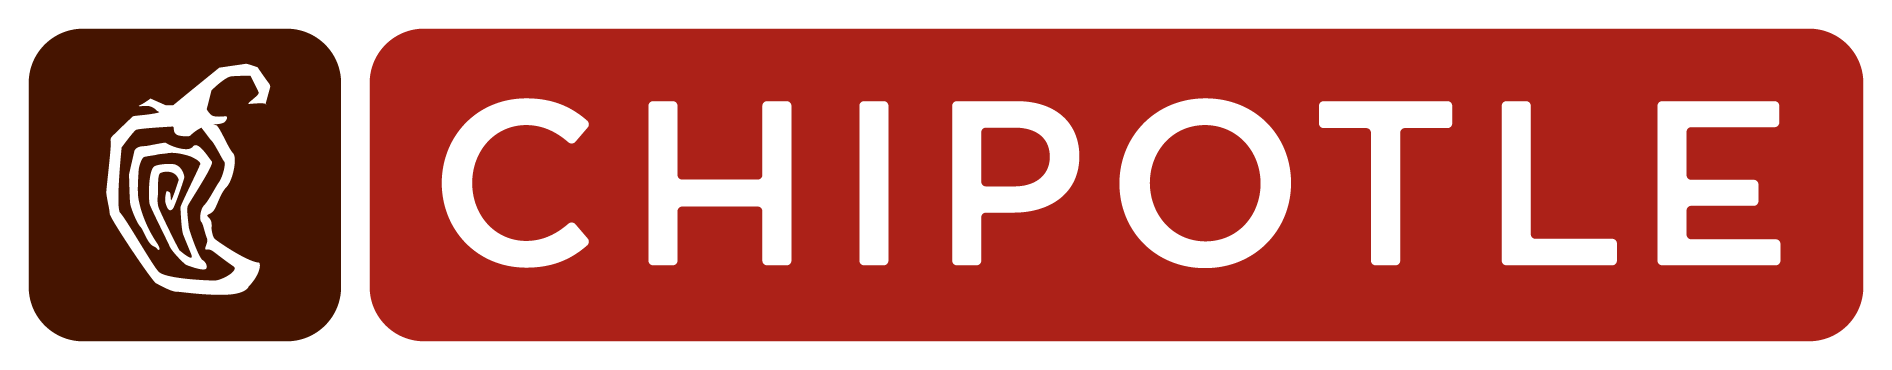 logo of Chipotle